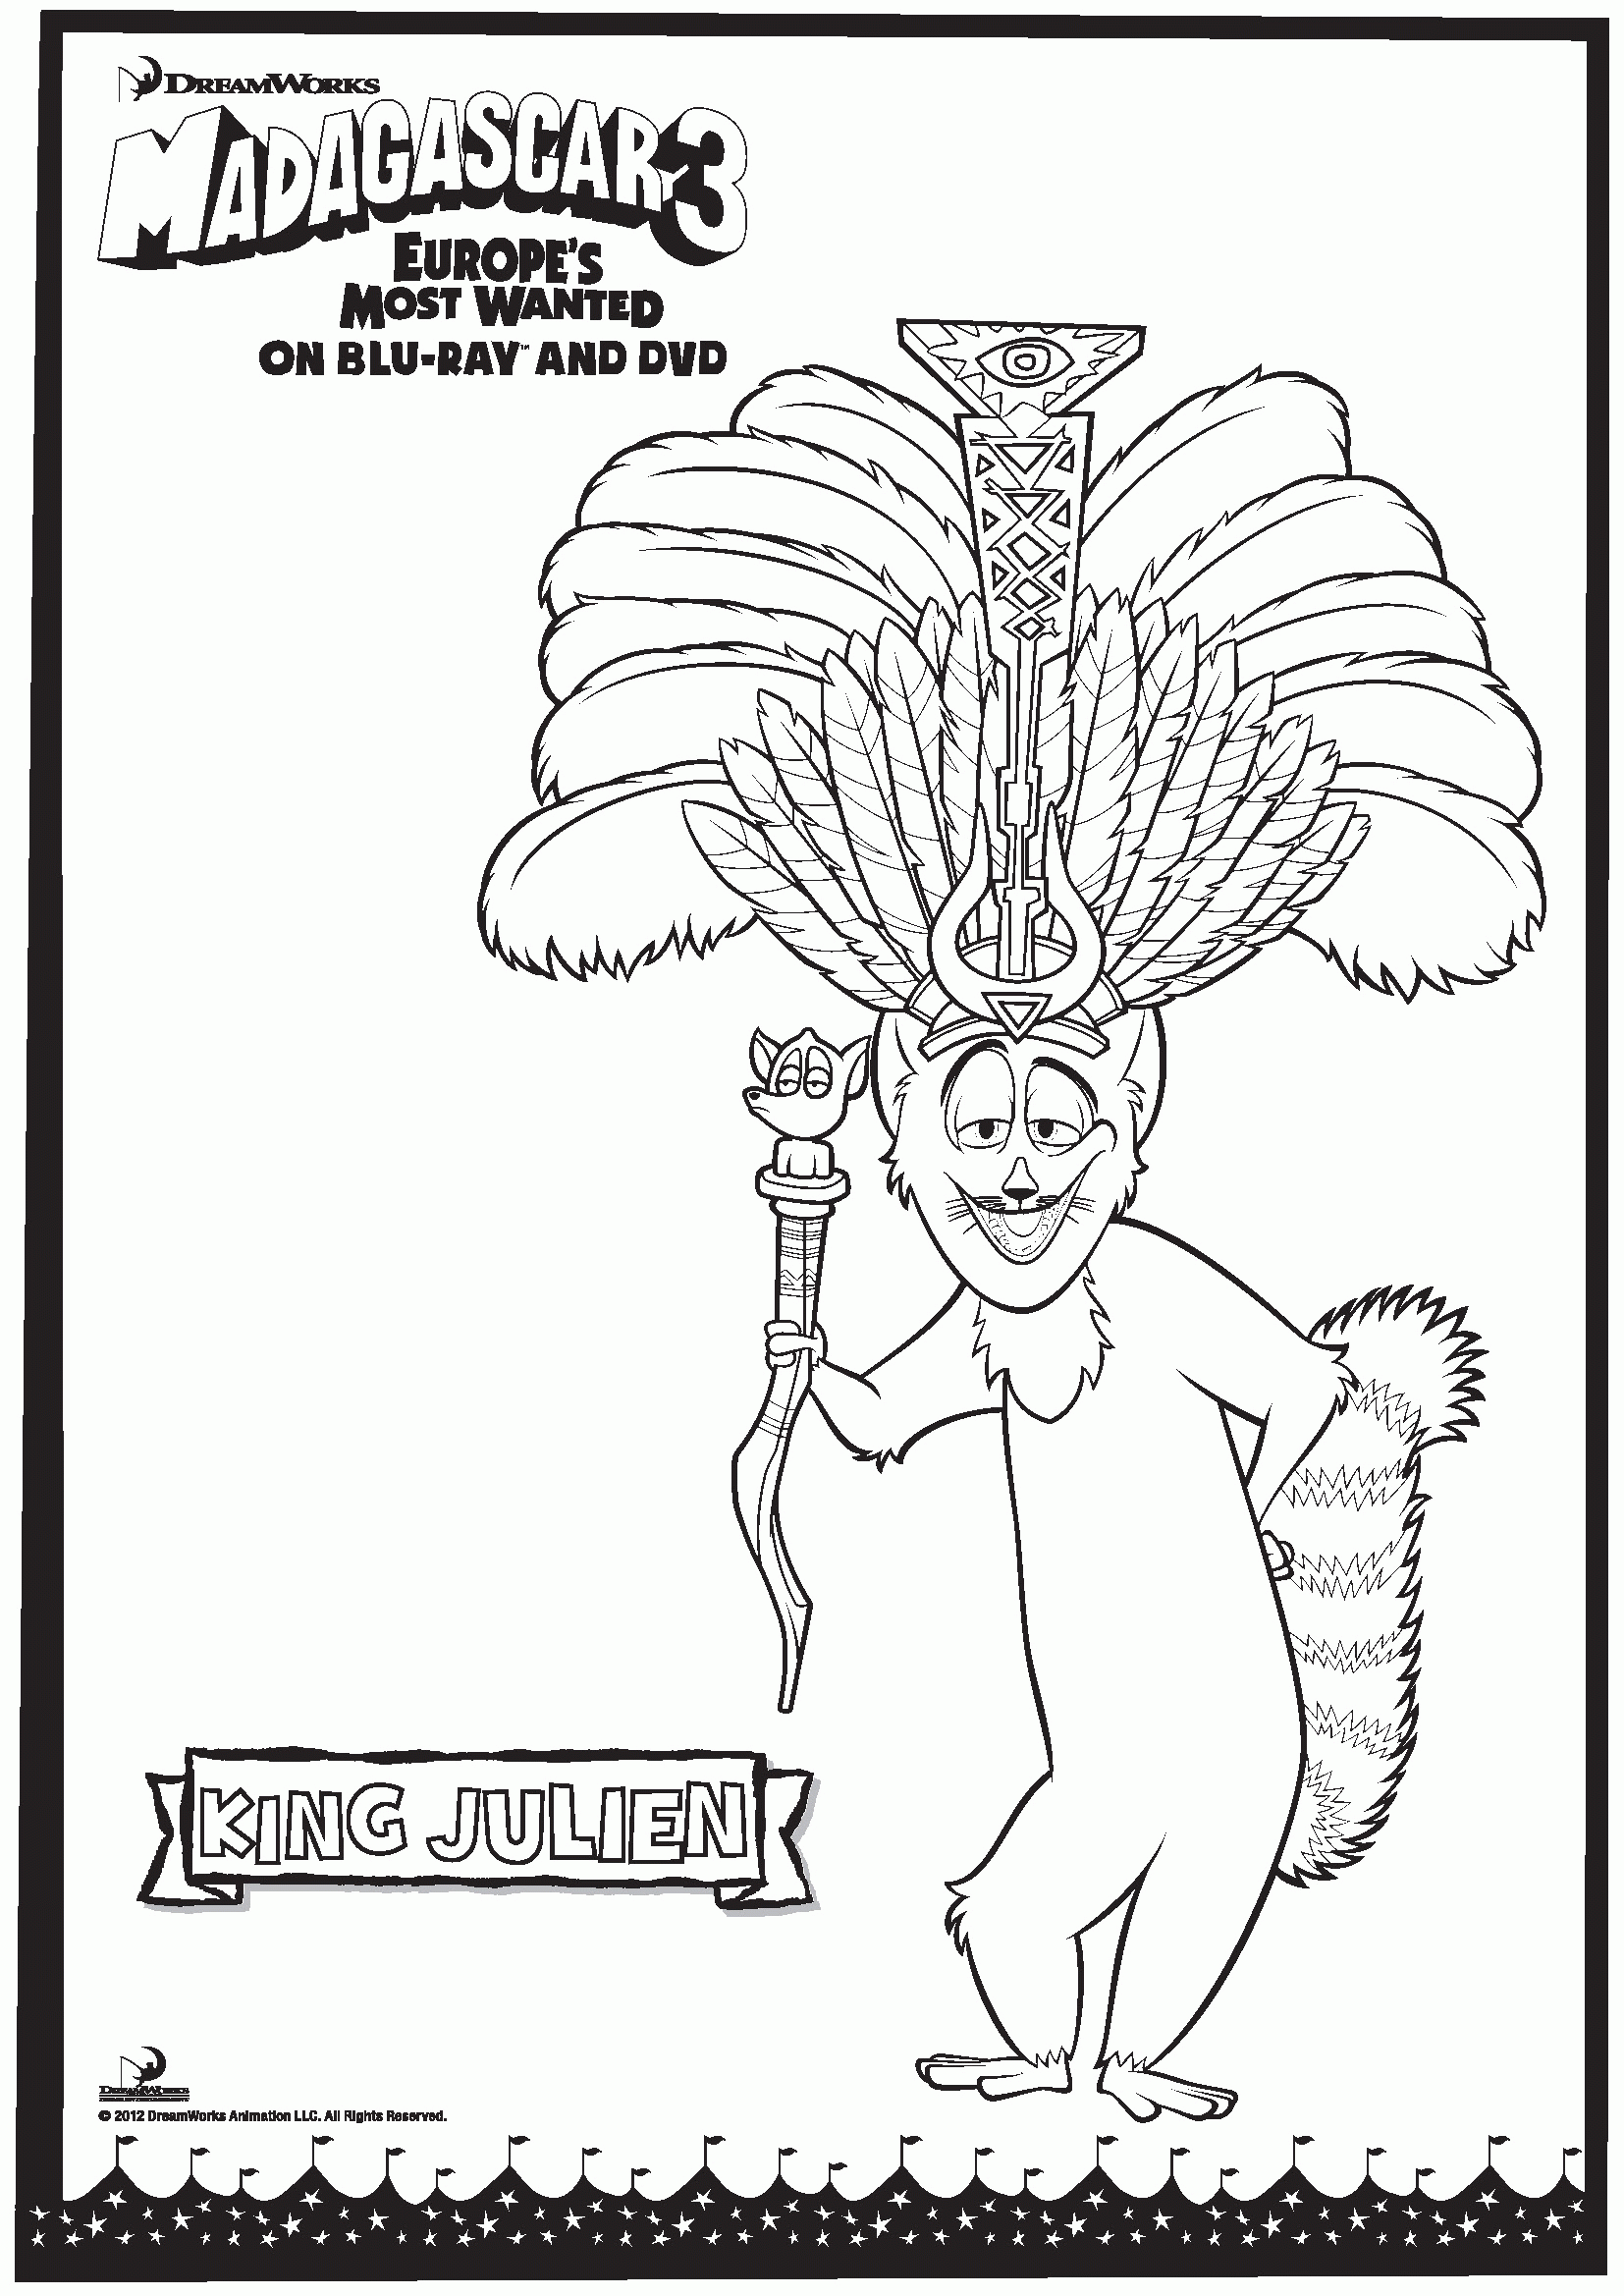 Coloring Pages Madagascar 3 - Madagascar Coloring Pages / Pypus is now